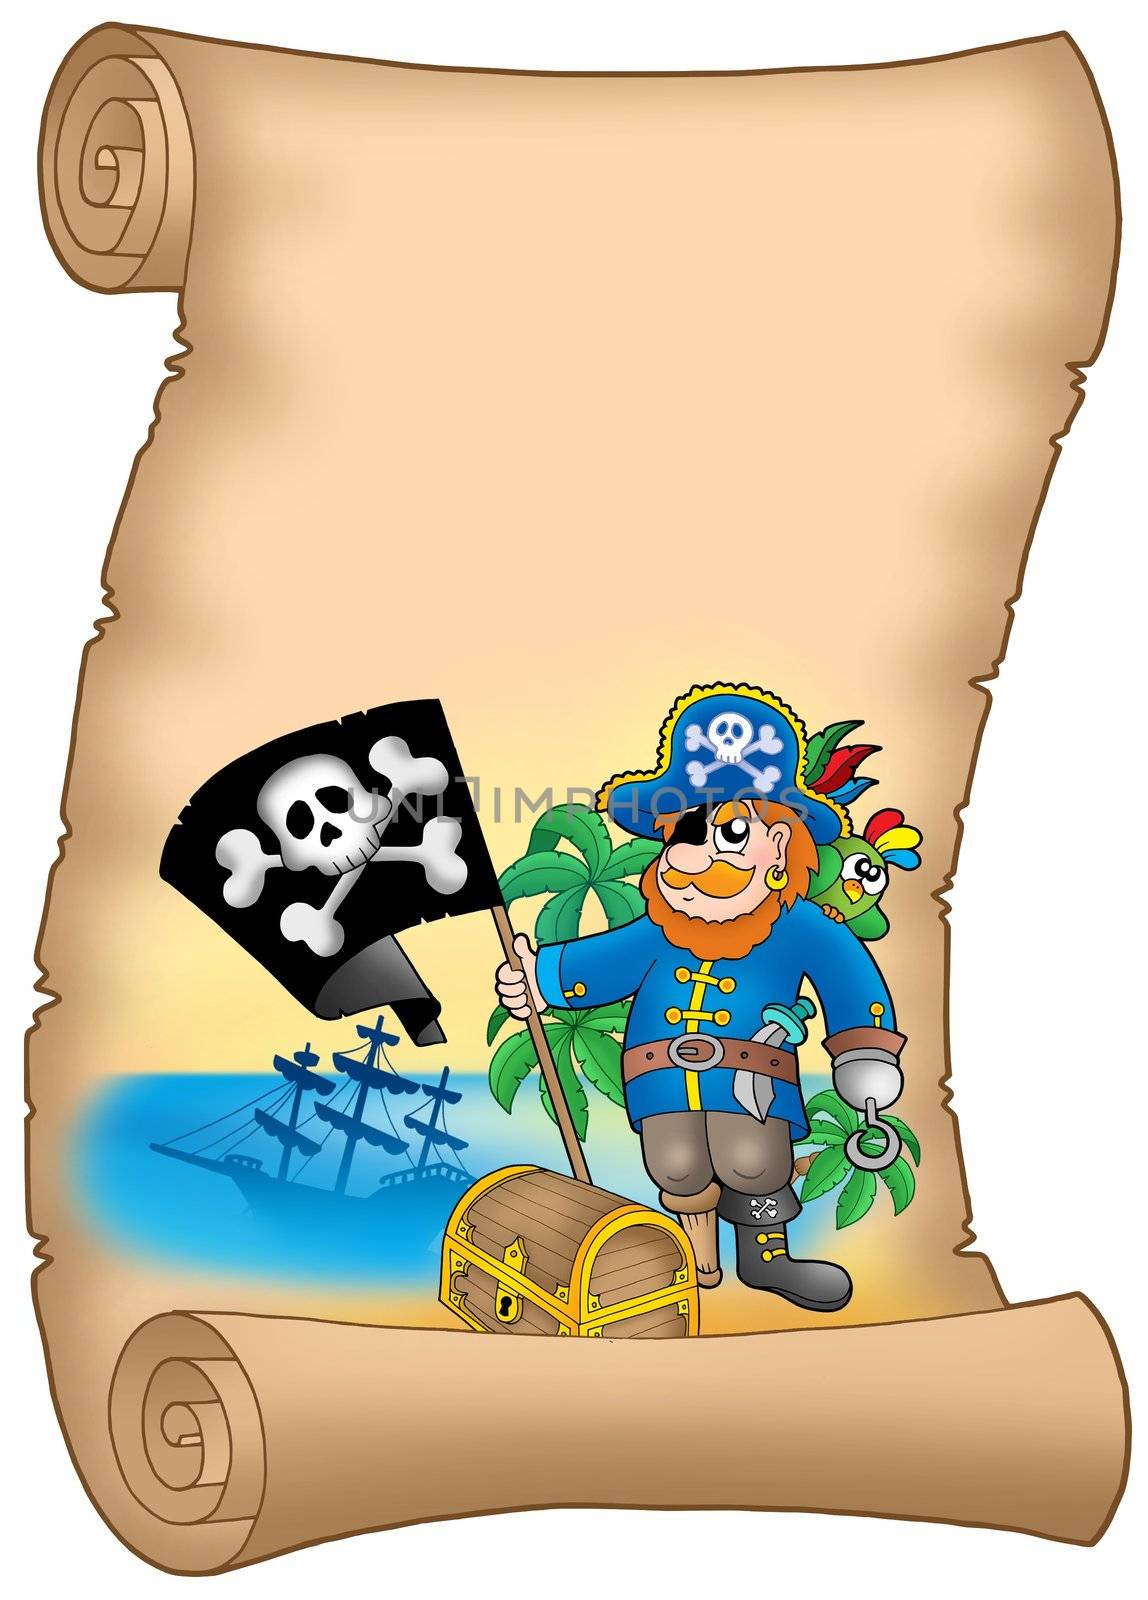 Parchment with pirate holding flag by clairev